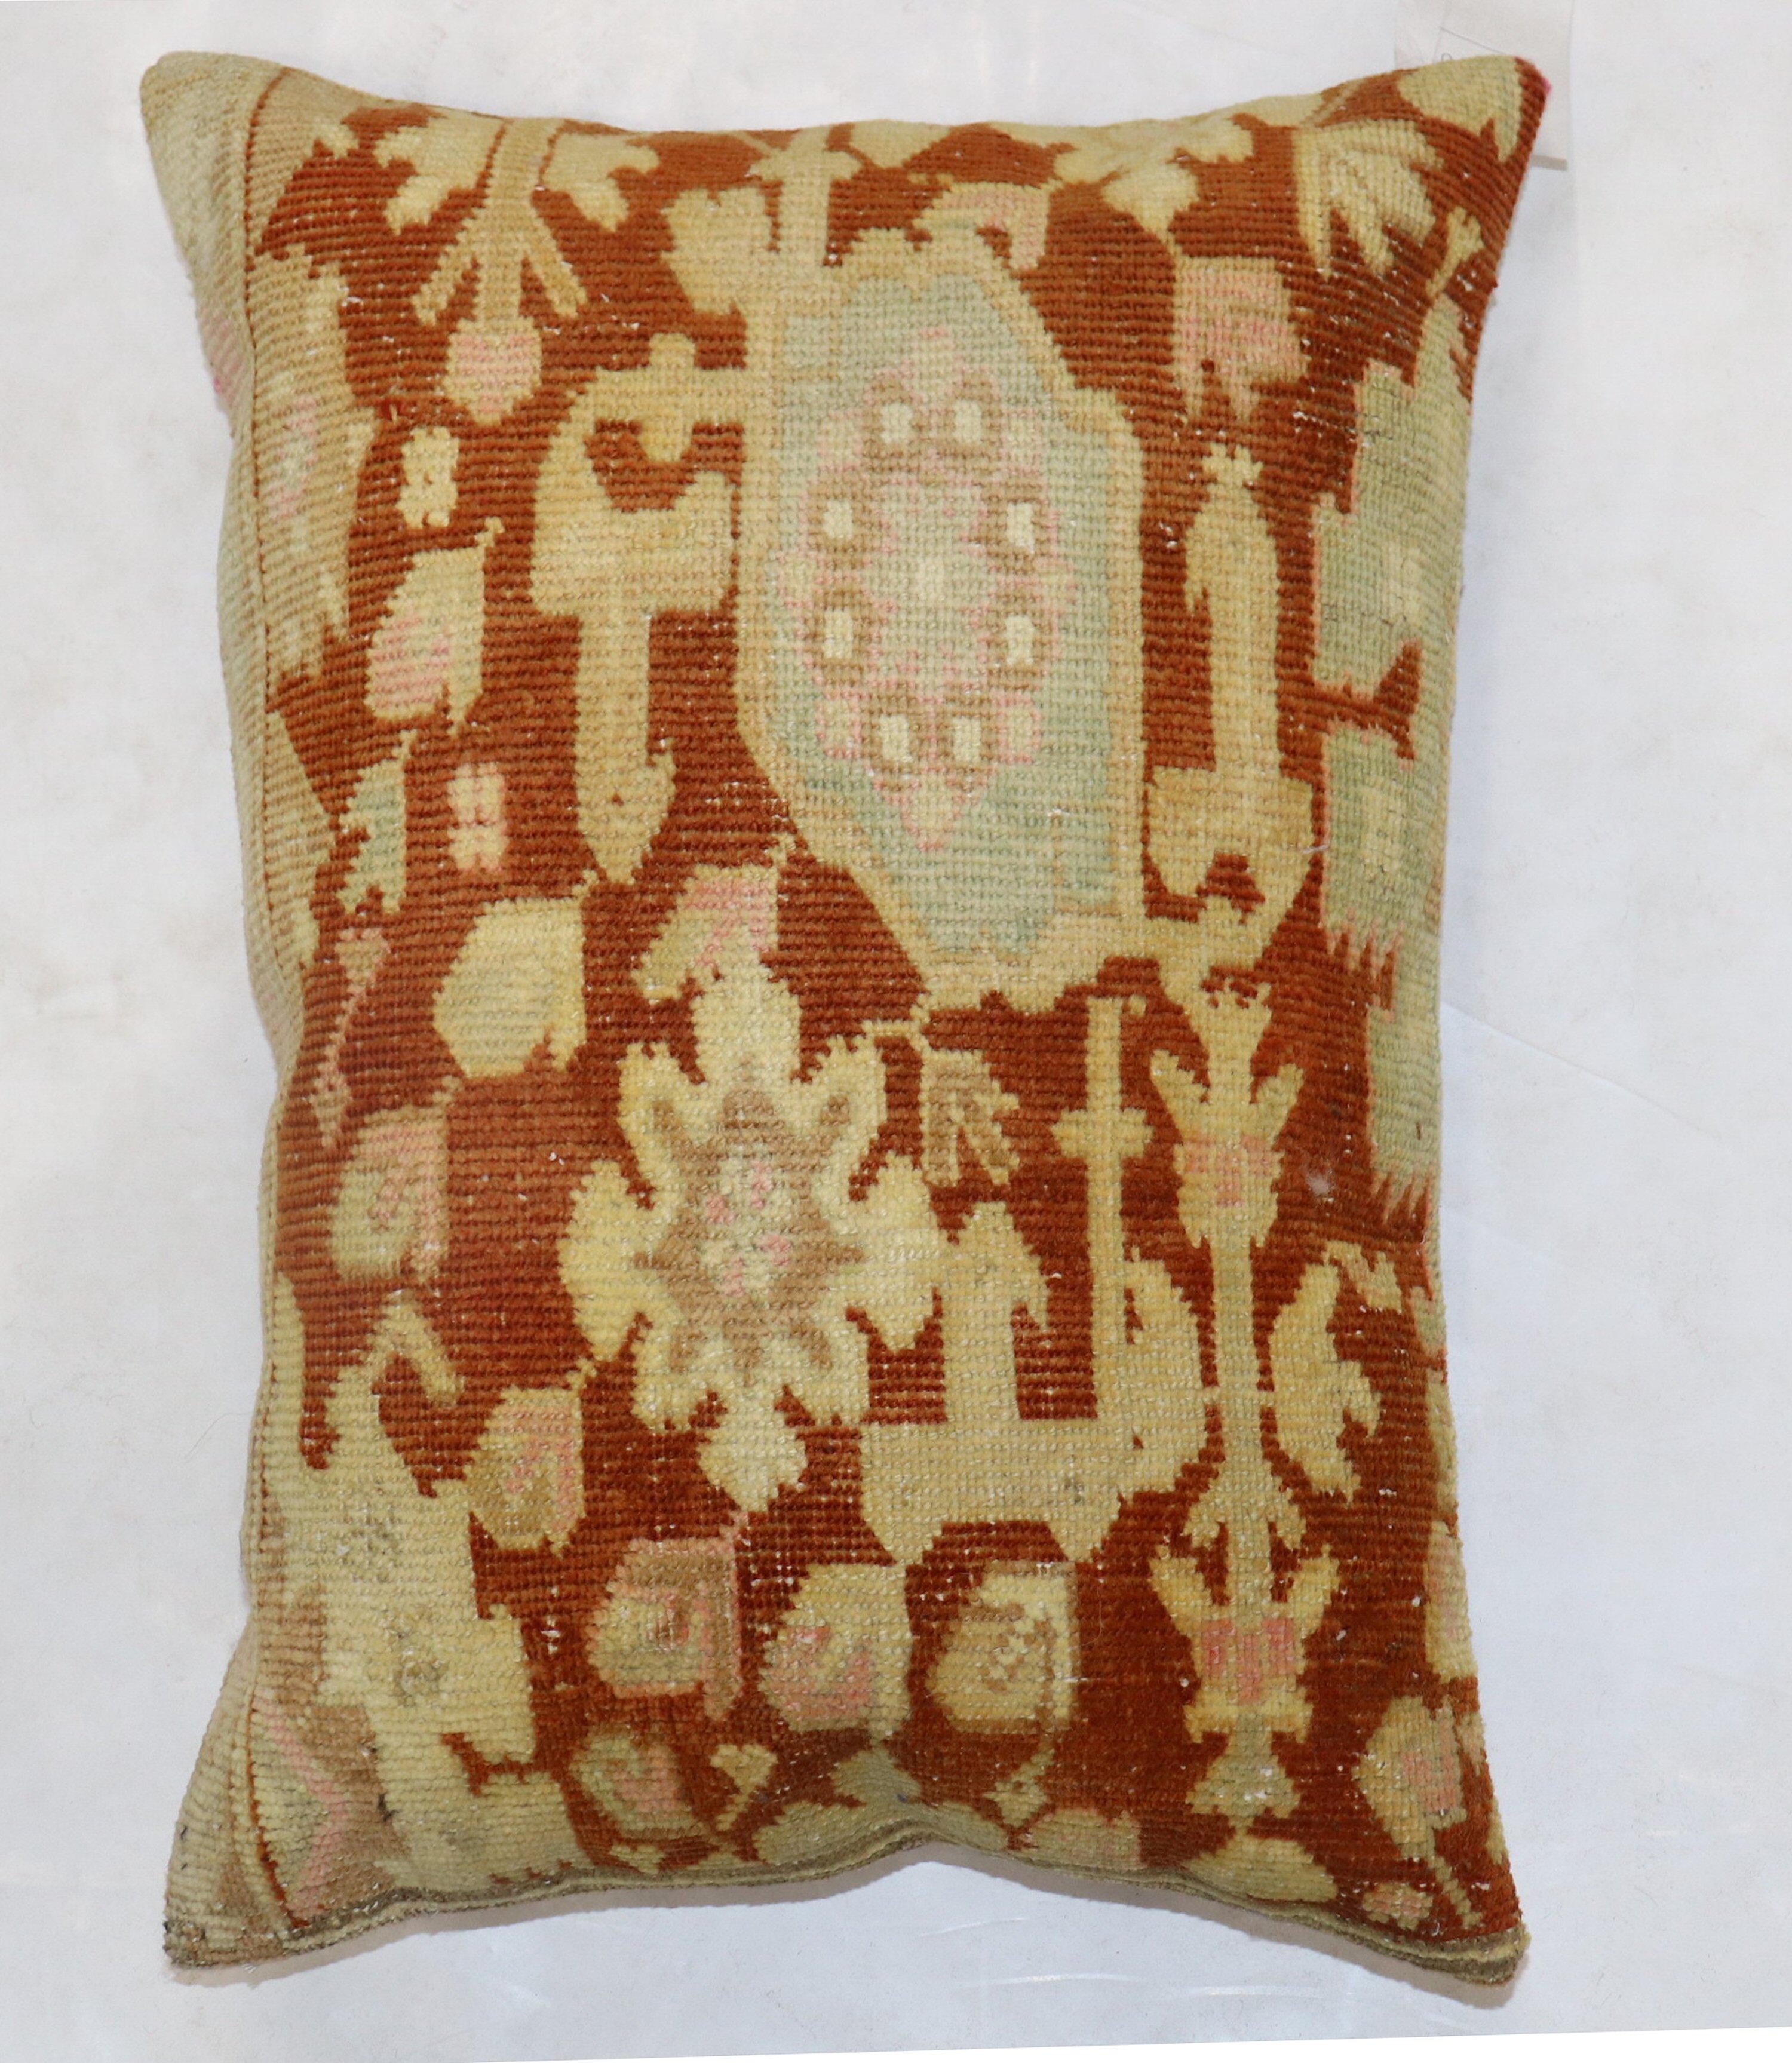 Pillow made from an early 20th Century Antique Indian Agra rug. zipper closure and polyfill insert provided

Measures 19'' x 27''.